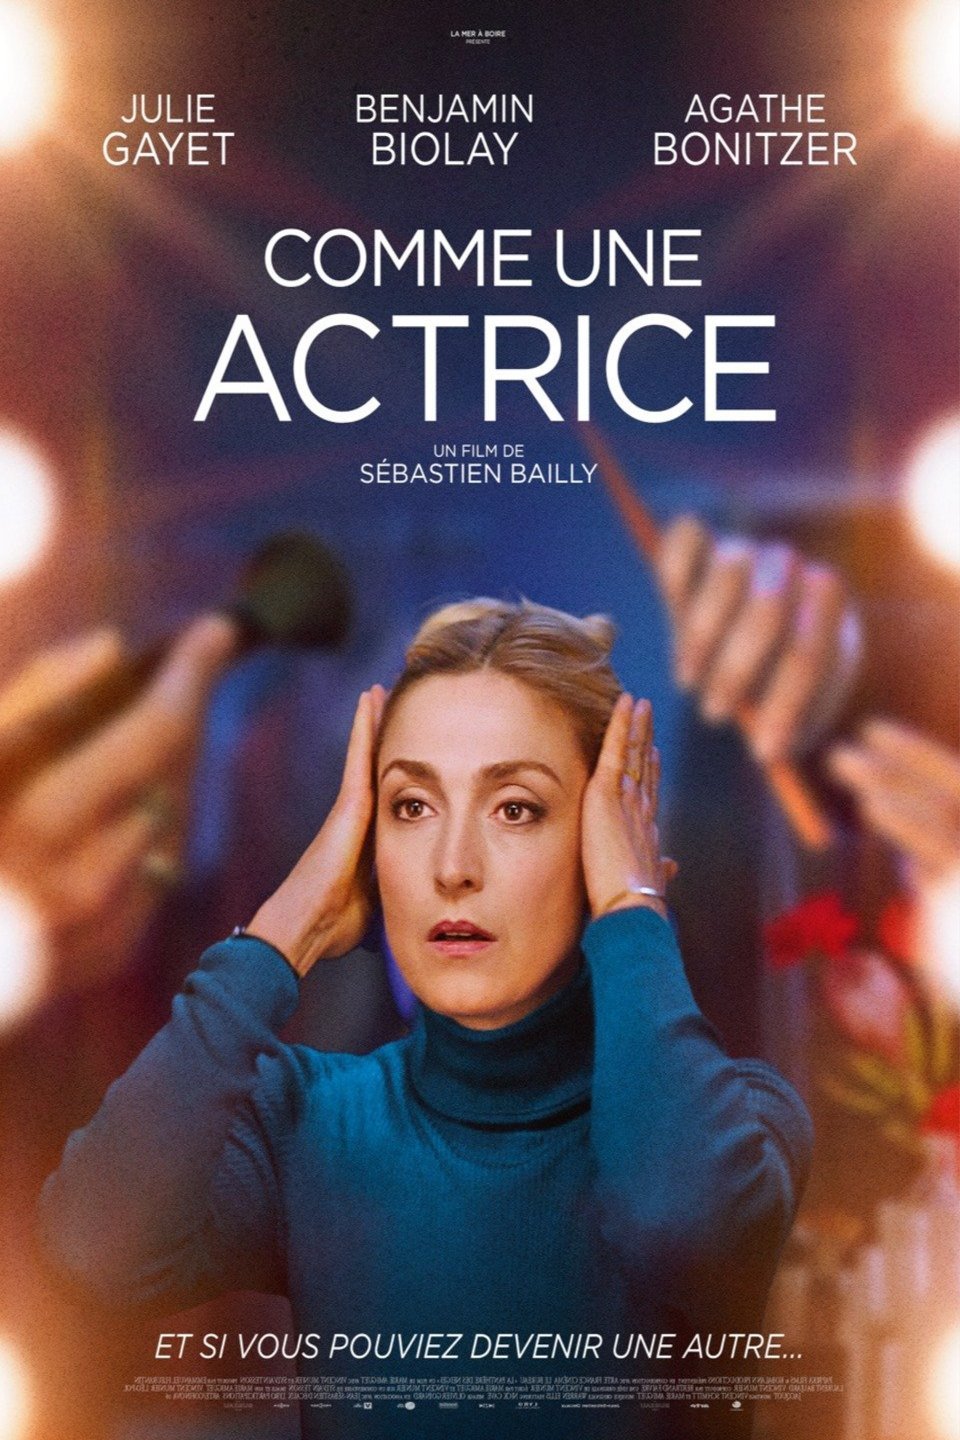 Poster of the movie Comme une actrice